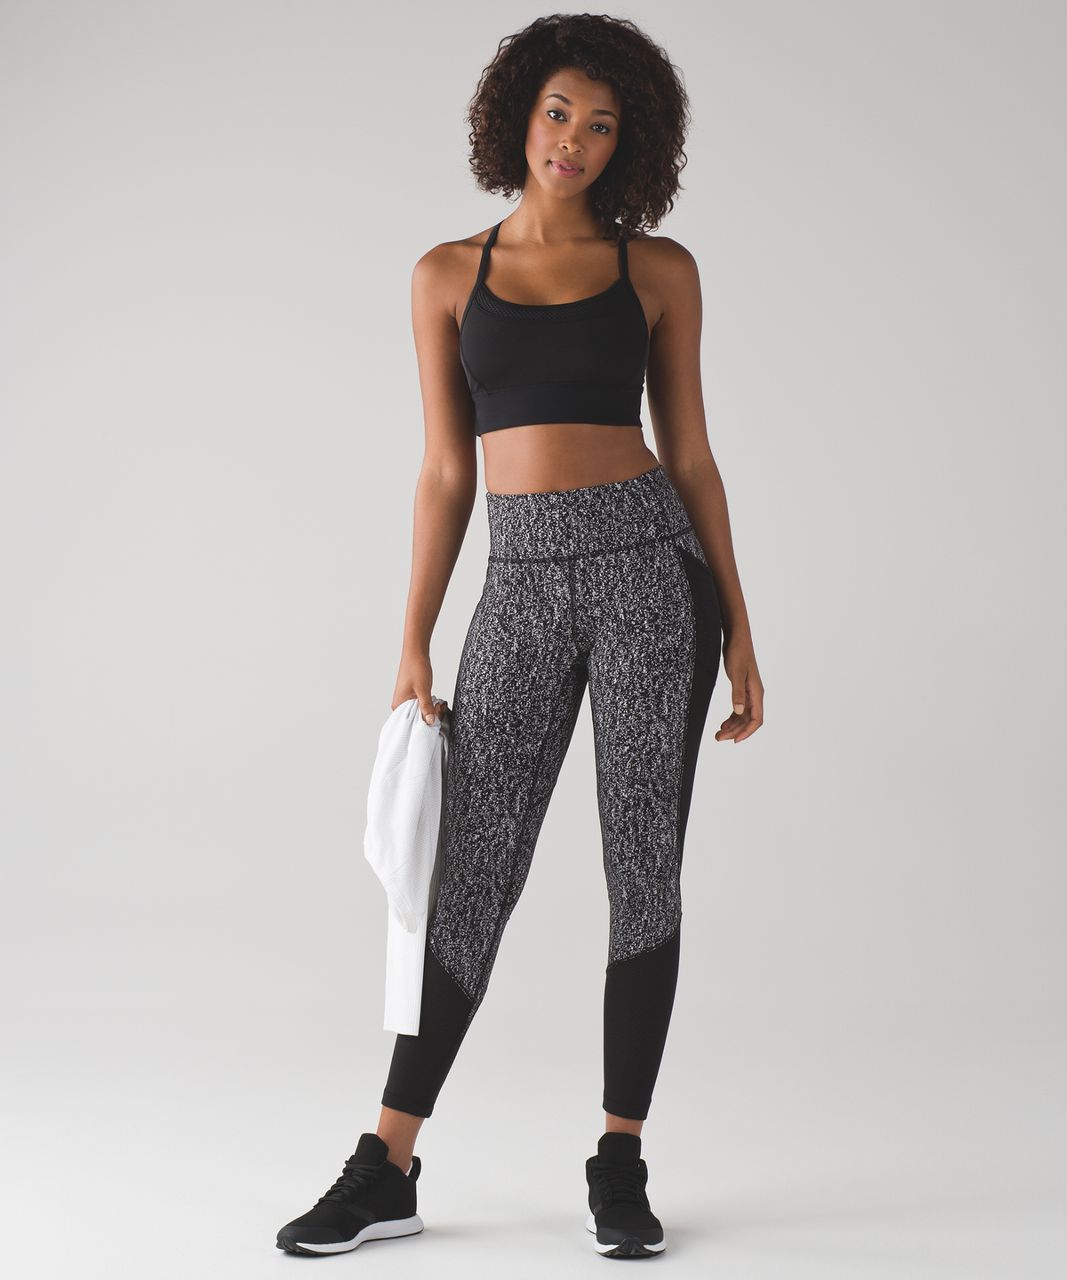 Lululemon Luon Suited Jacquard Black White Fit Physique Tight High Rise  Leggings 